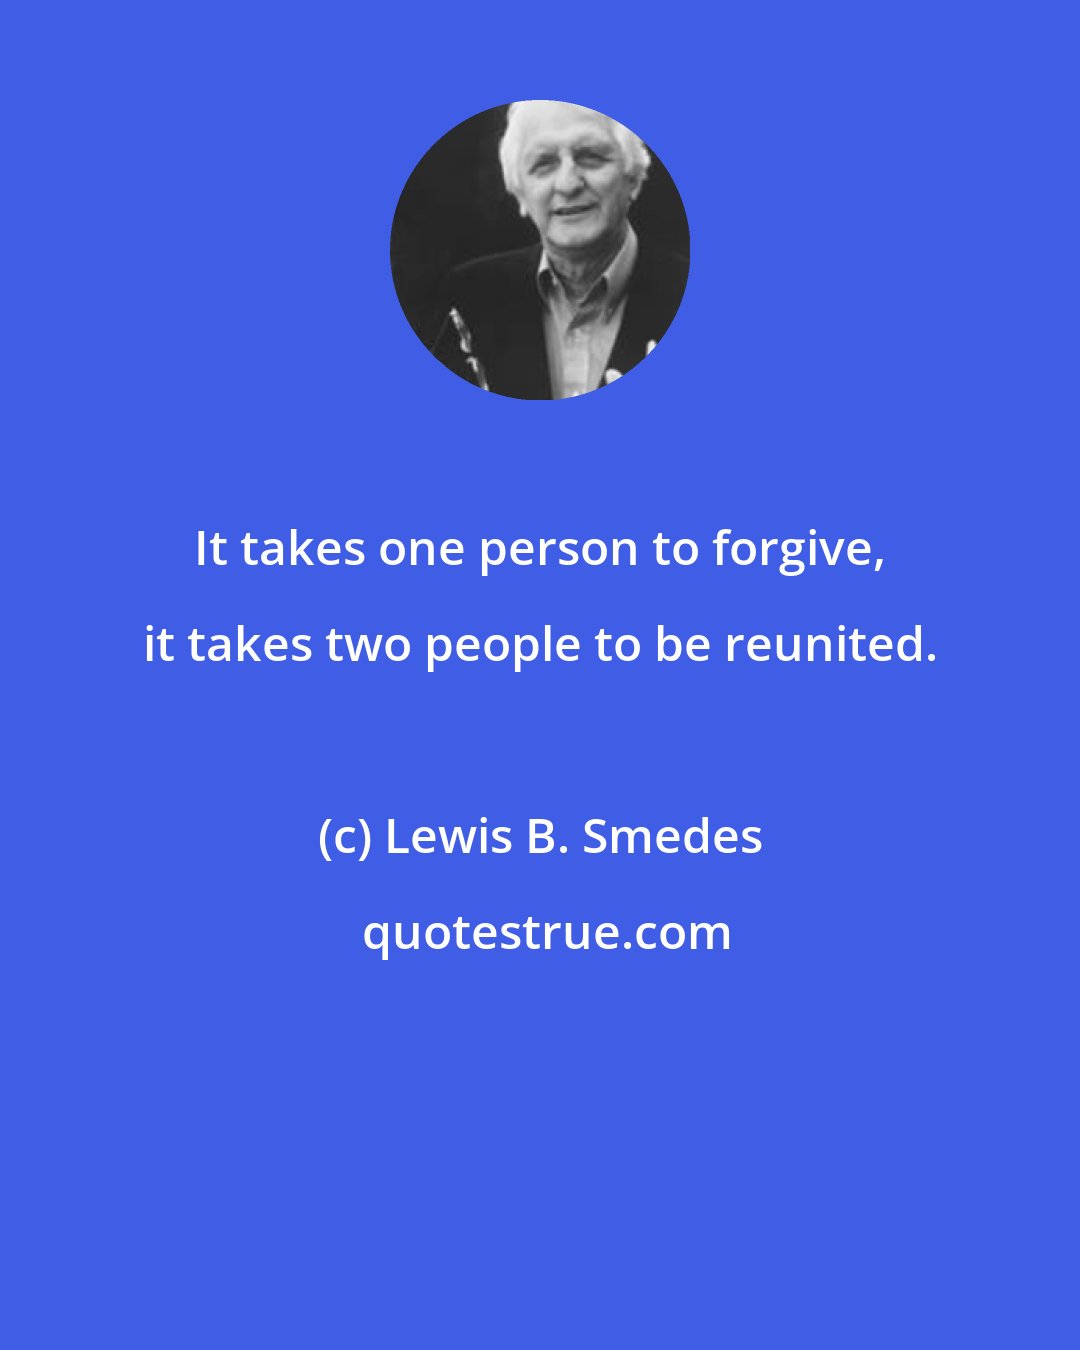 Lewis B. Smedes: It takes one person to forgive, it takes two people to be reunited.